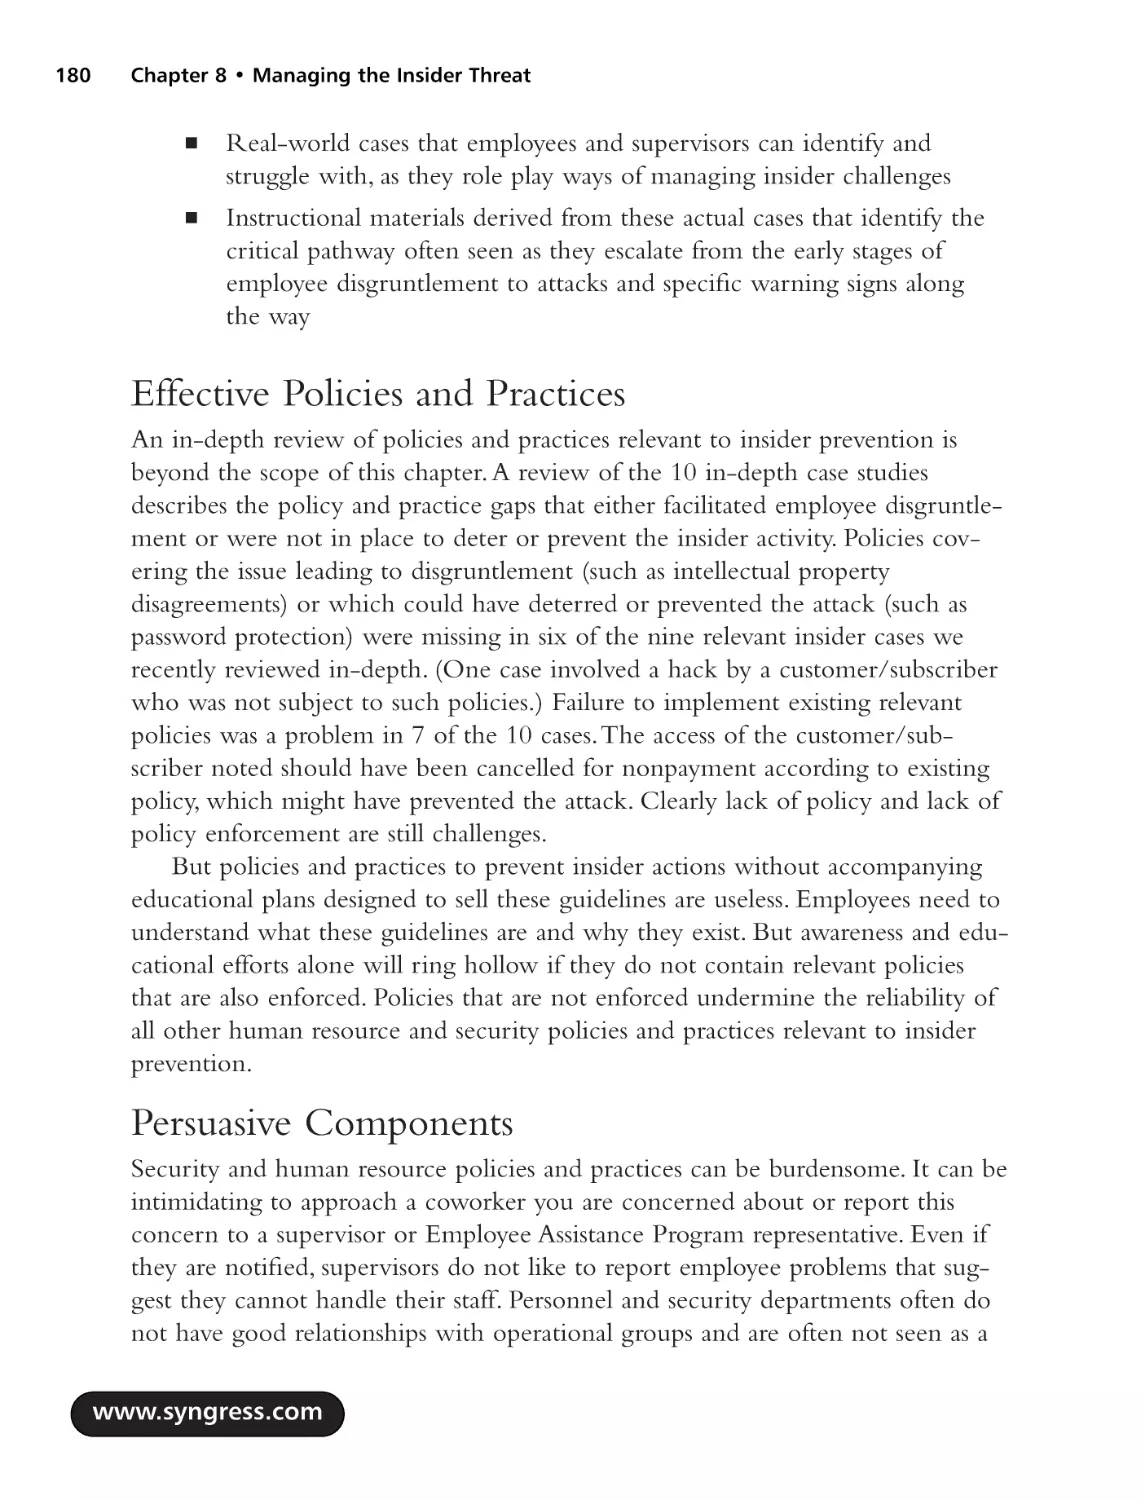 Effective Policies and Practices
Persuasive Components